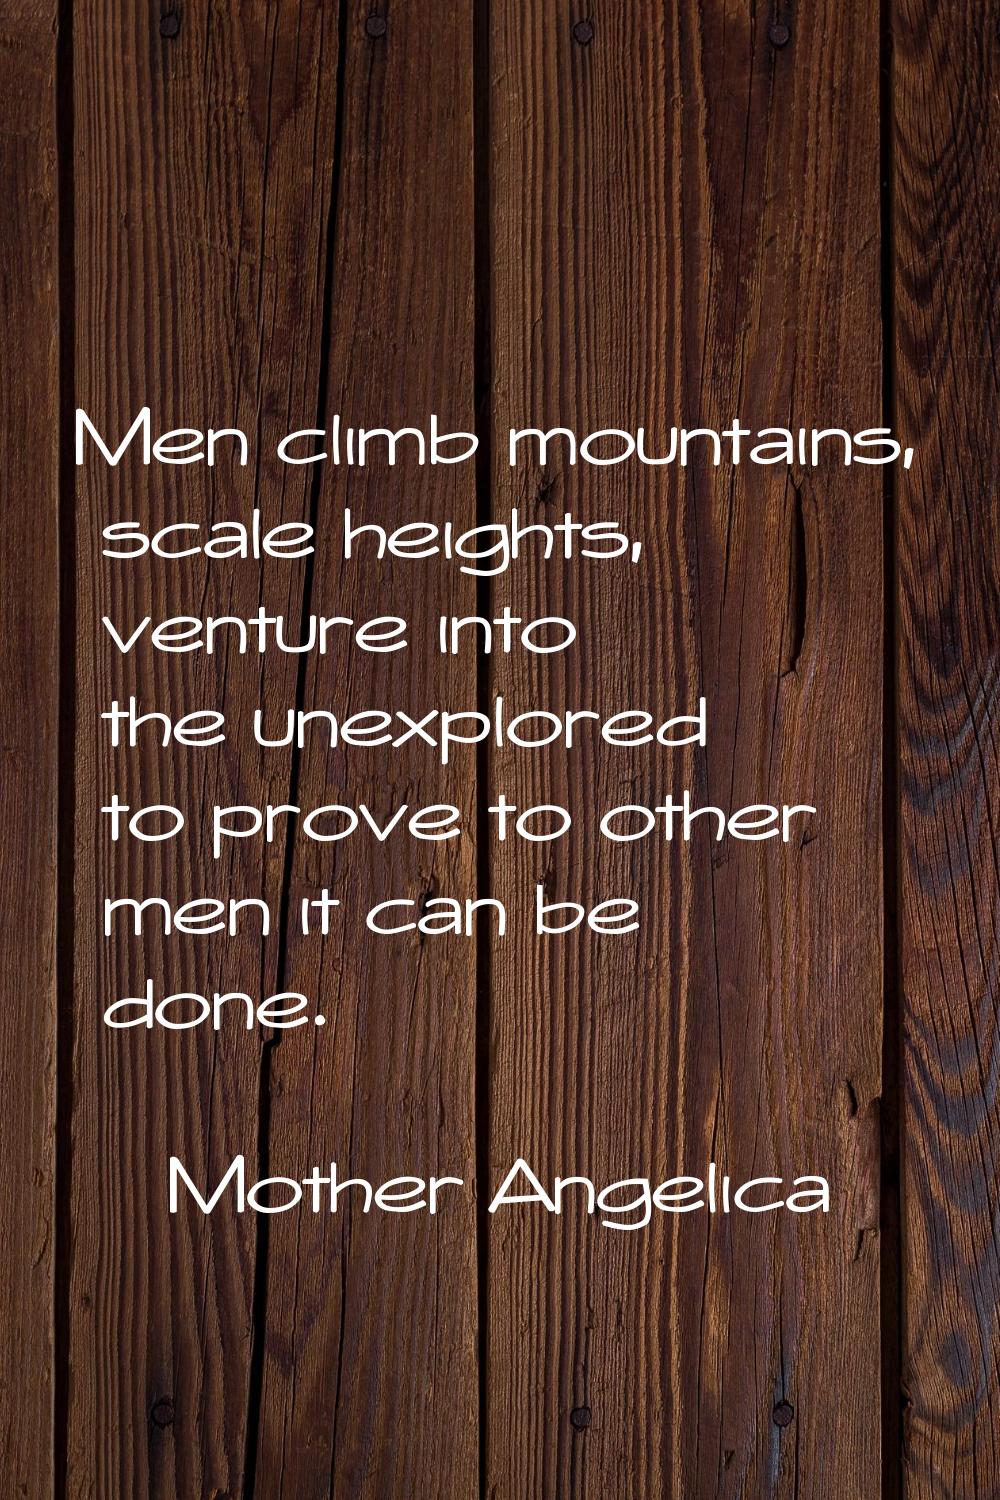 Men climb mountains, scale heights, venture into the unexplored to prove to other men it can be don